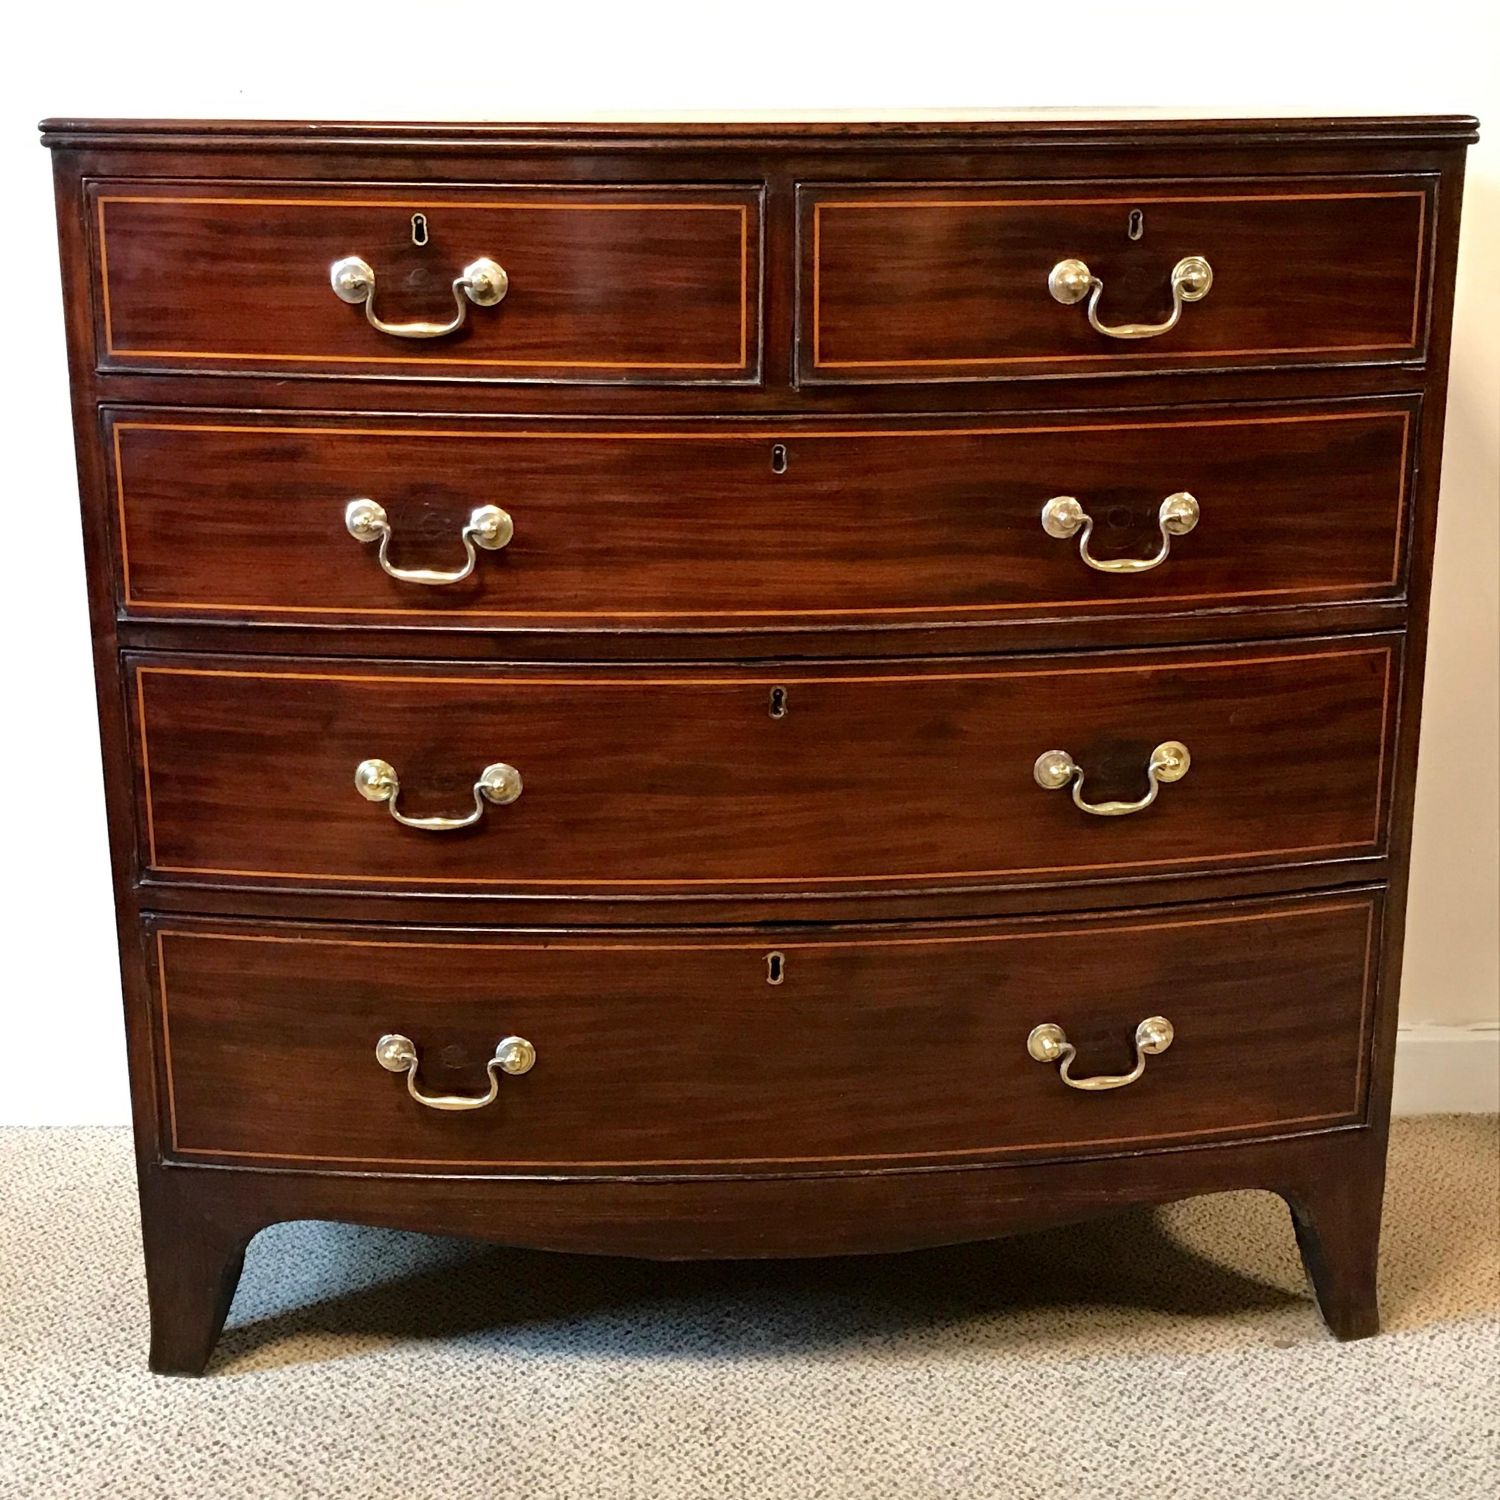 III period Mahogany Chest of Drawers Antique Chest of Drawers